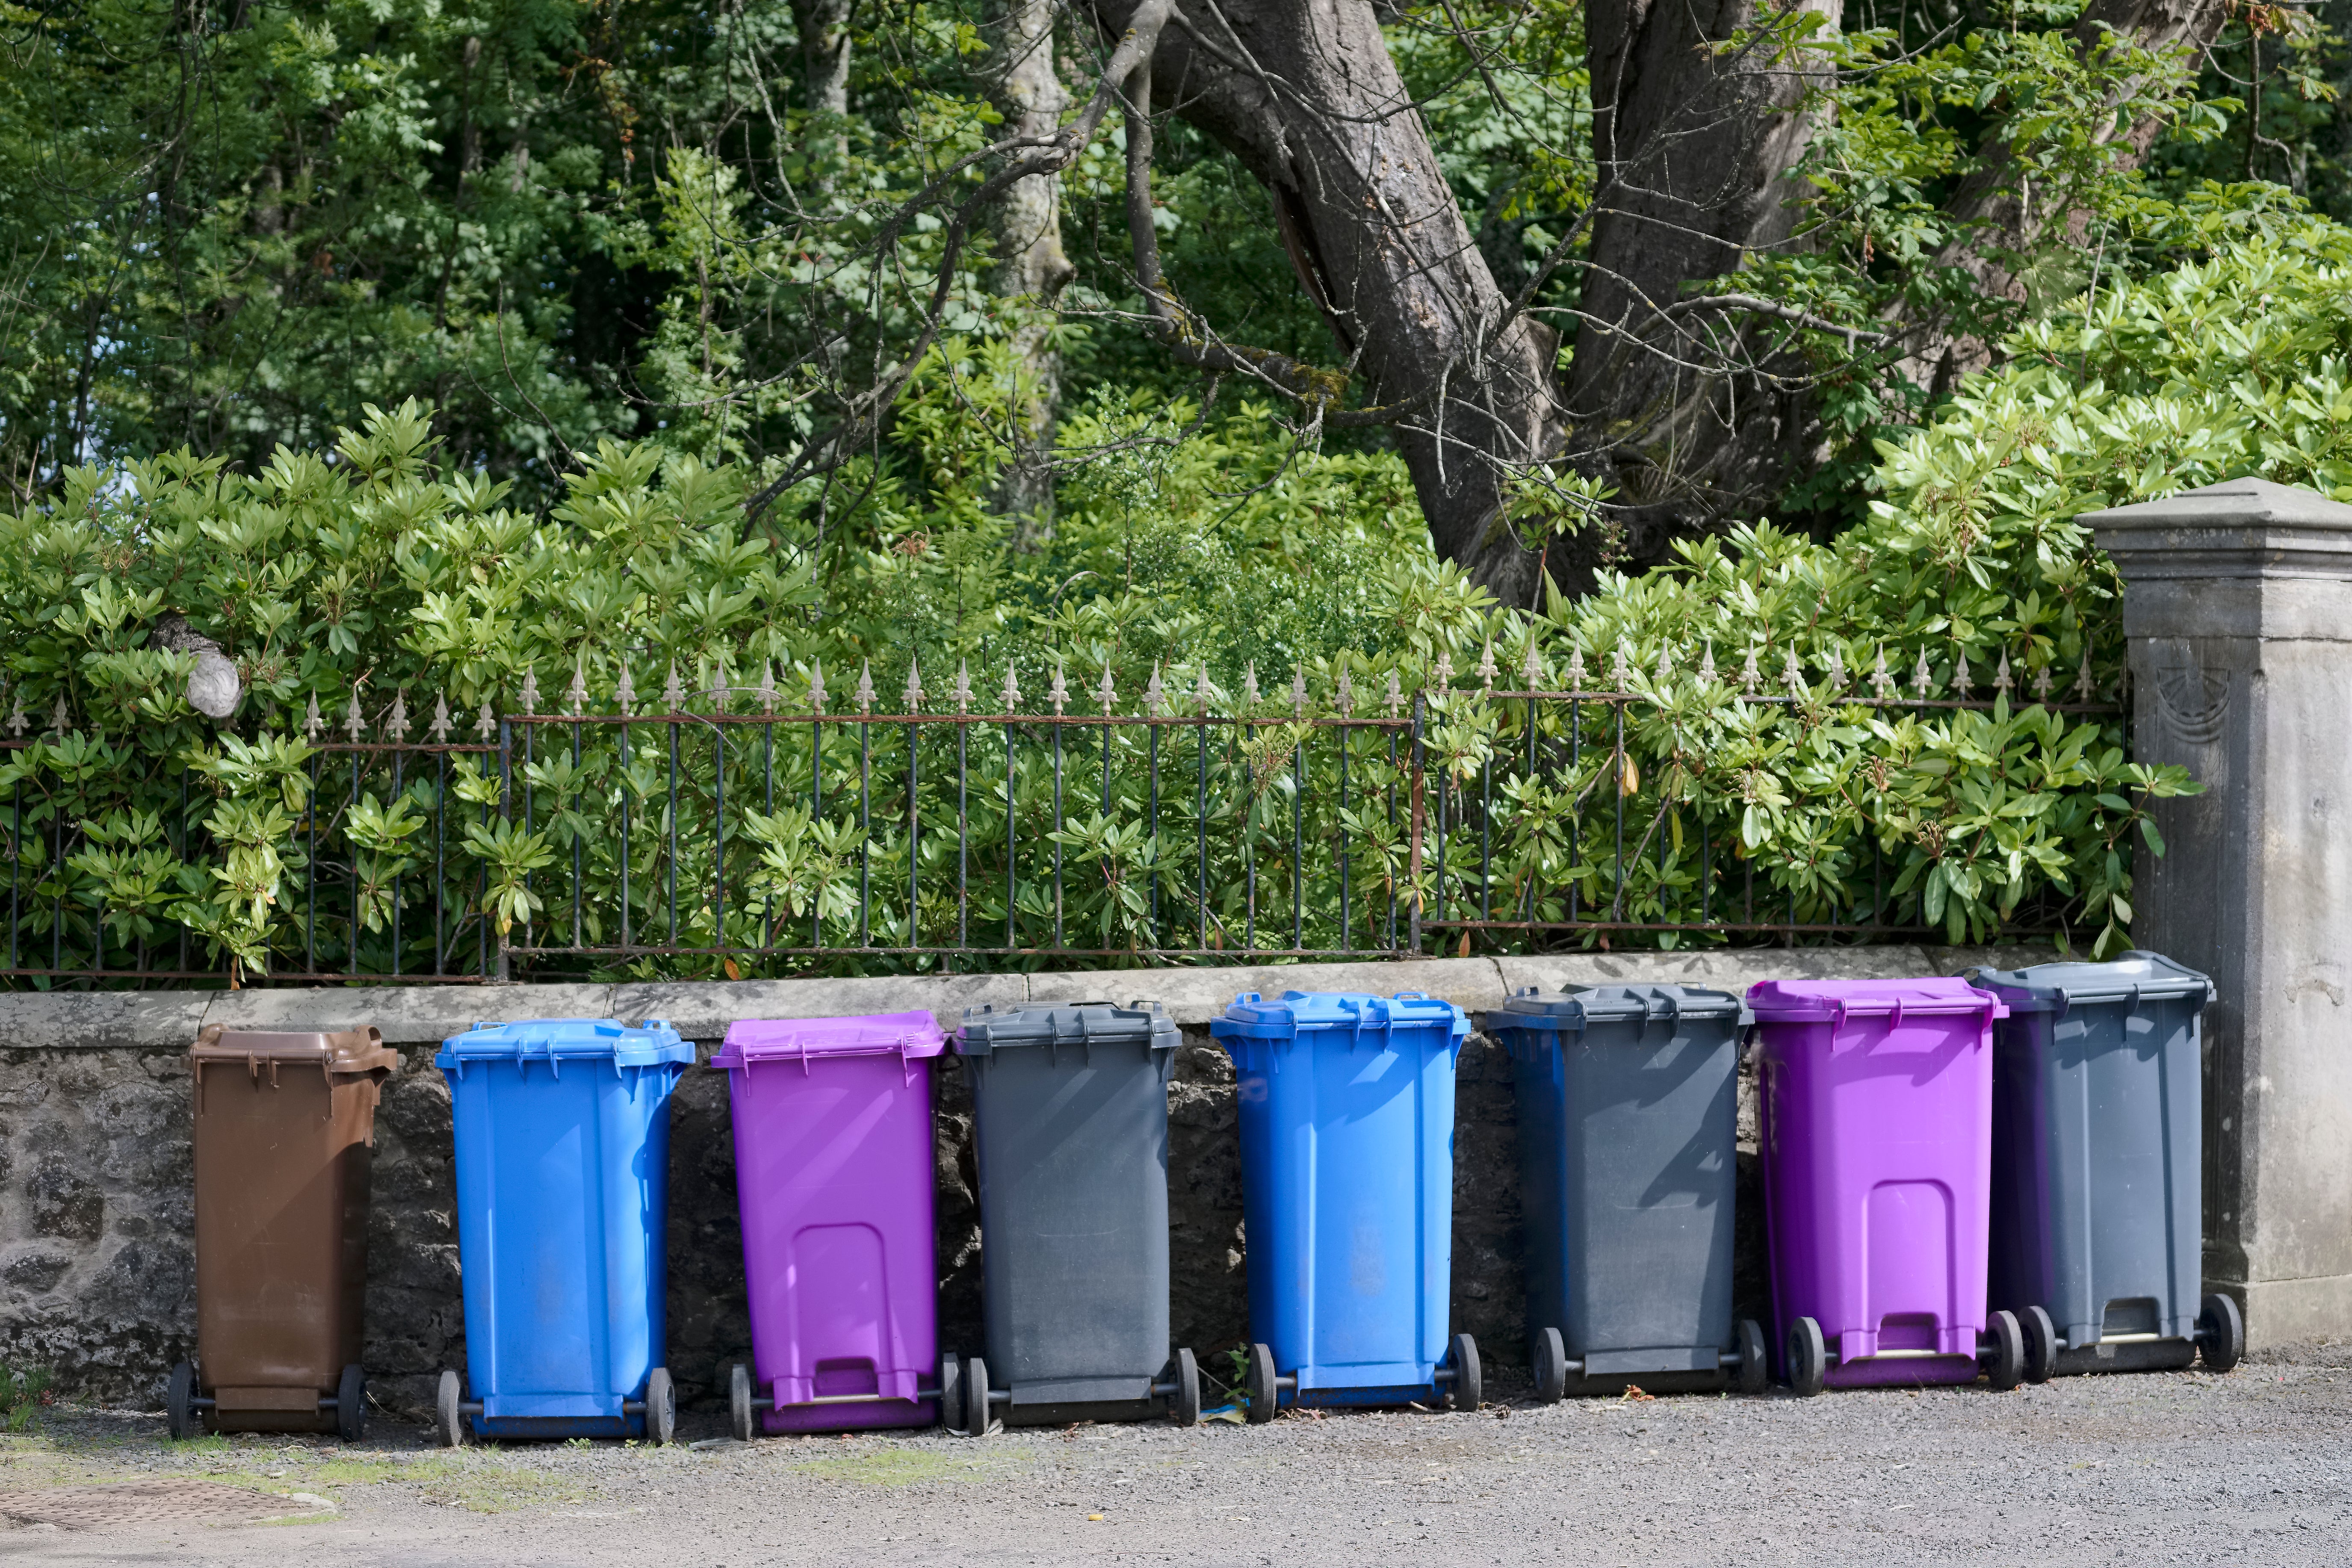 Get in the bins: We really need, dare I say it, is a more intelligent, flexible green policy